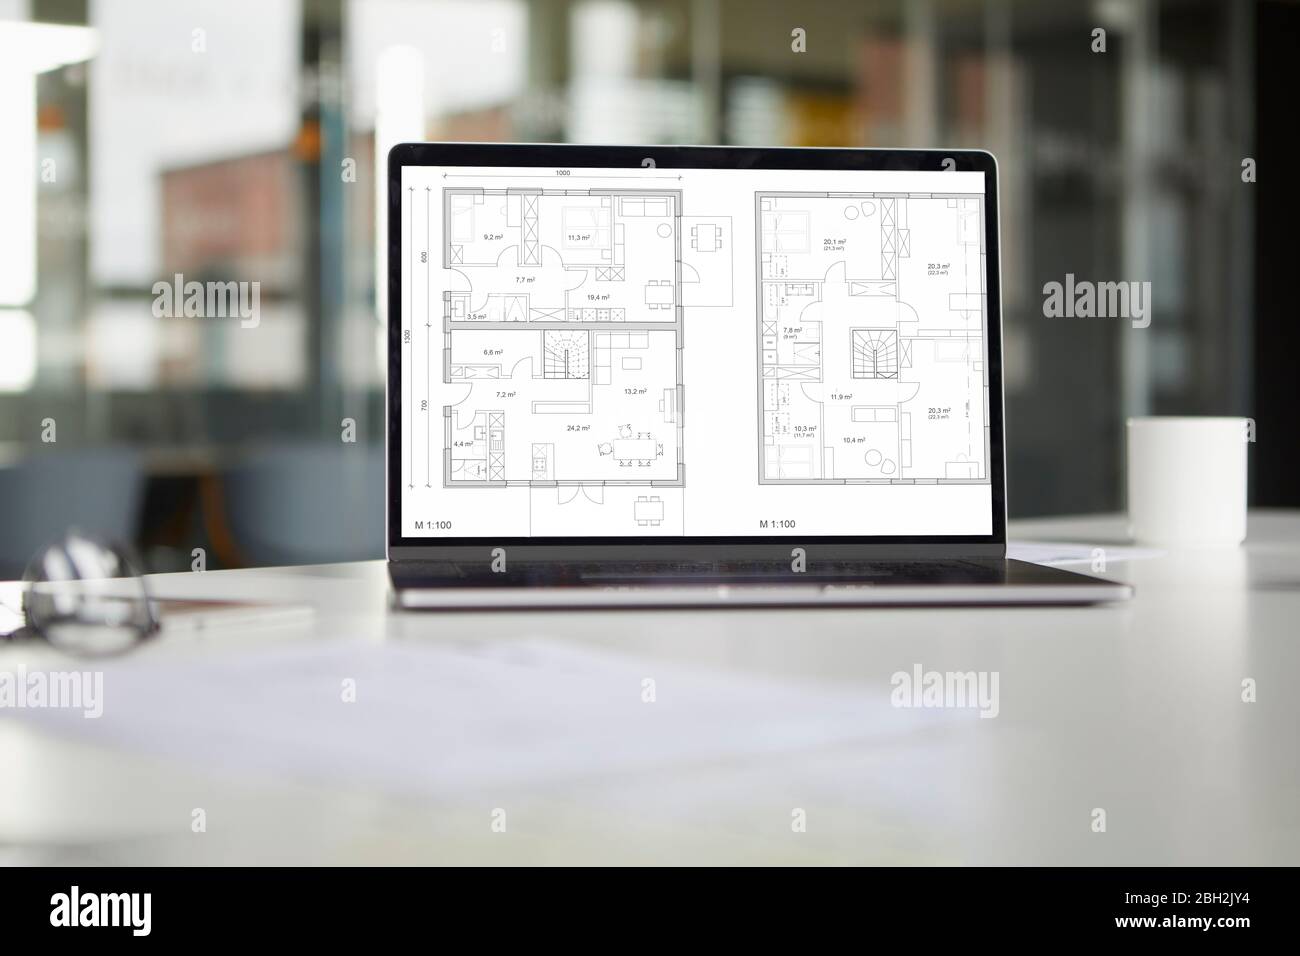 Tablet with floor plan in office Stock Photo